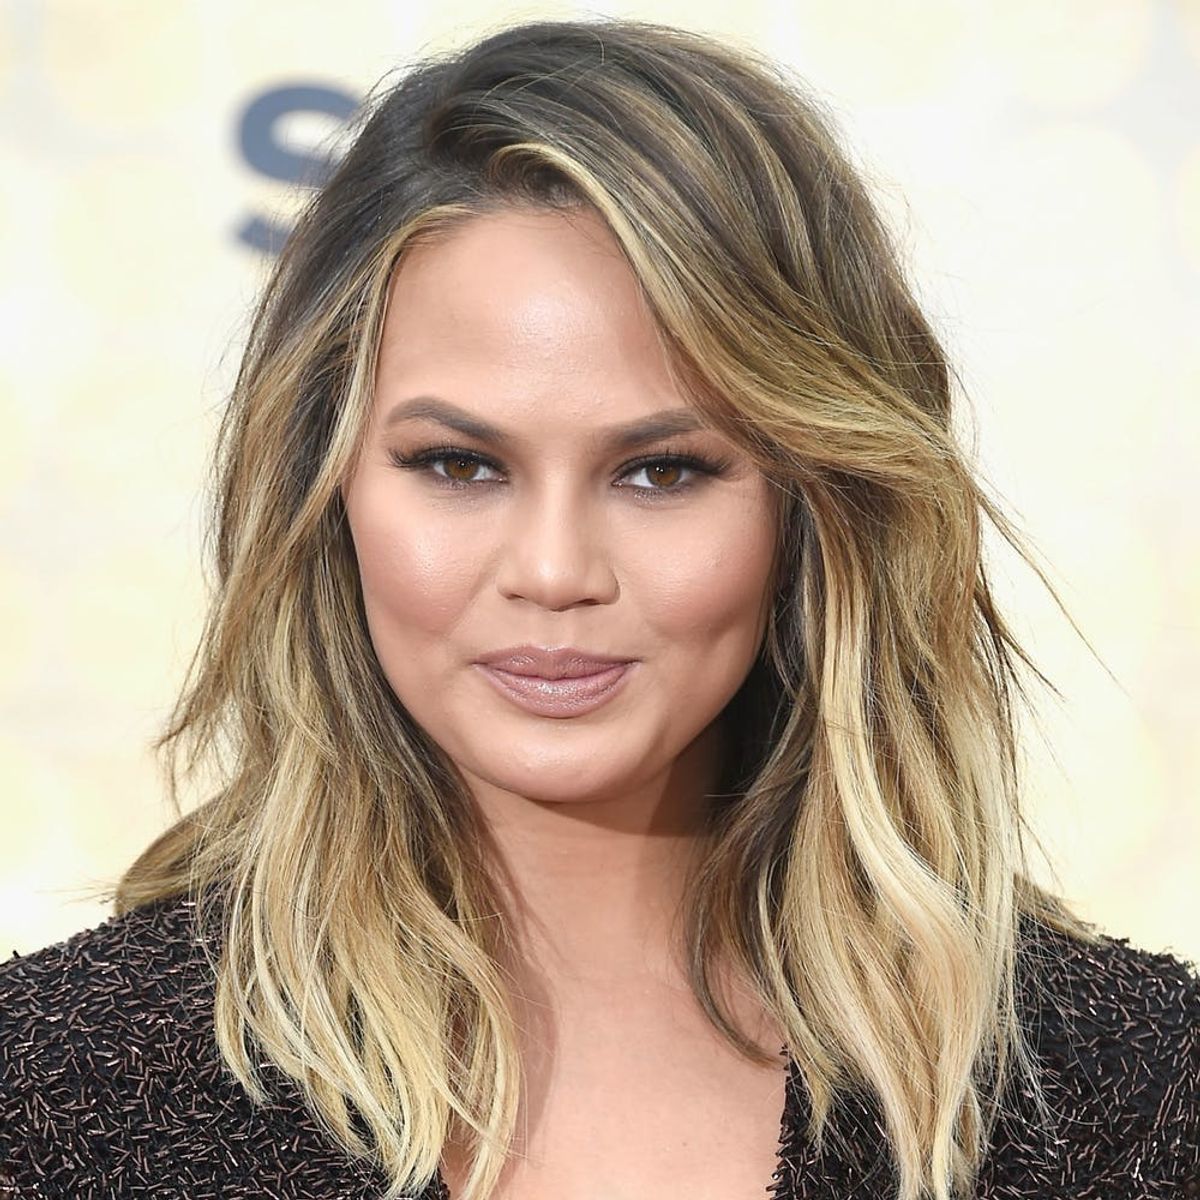 This Is Why You Won’t Find Any Diet Recipes in Chrissy Teigen’s Next Cookbook